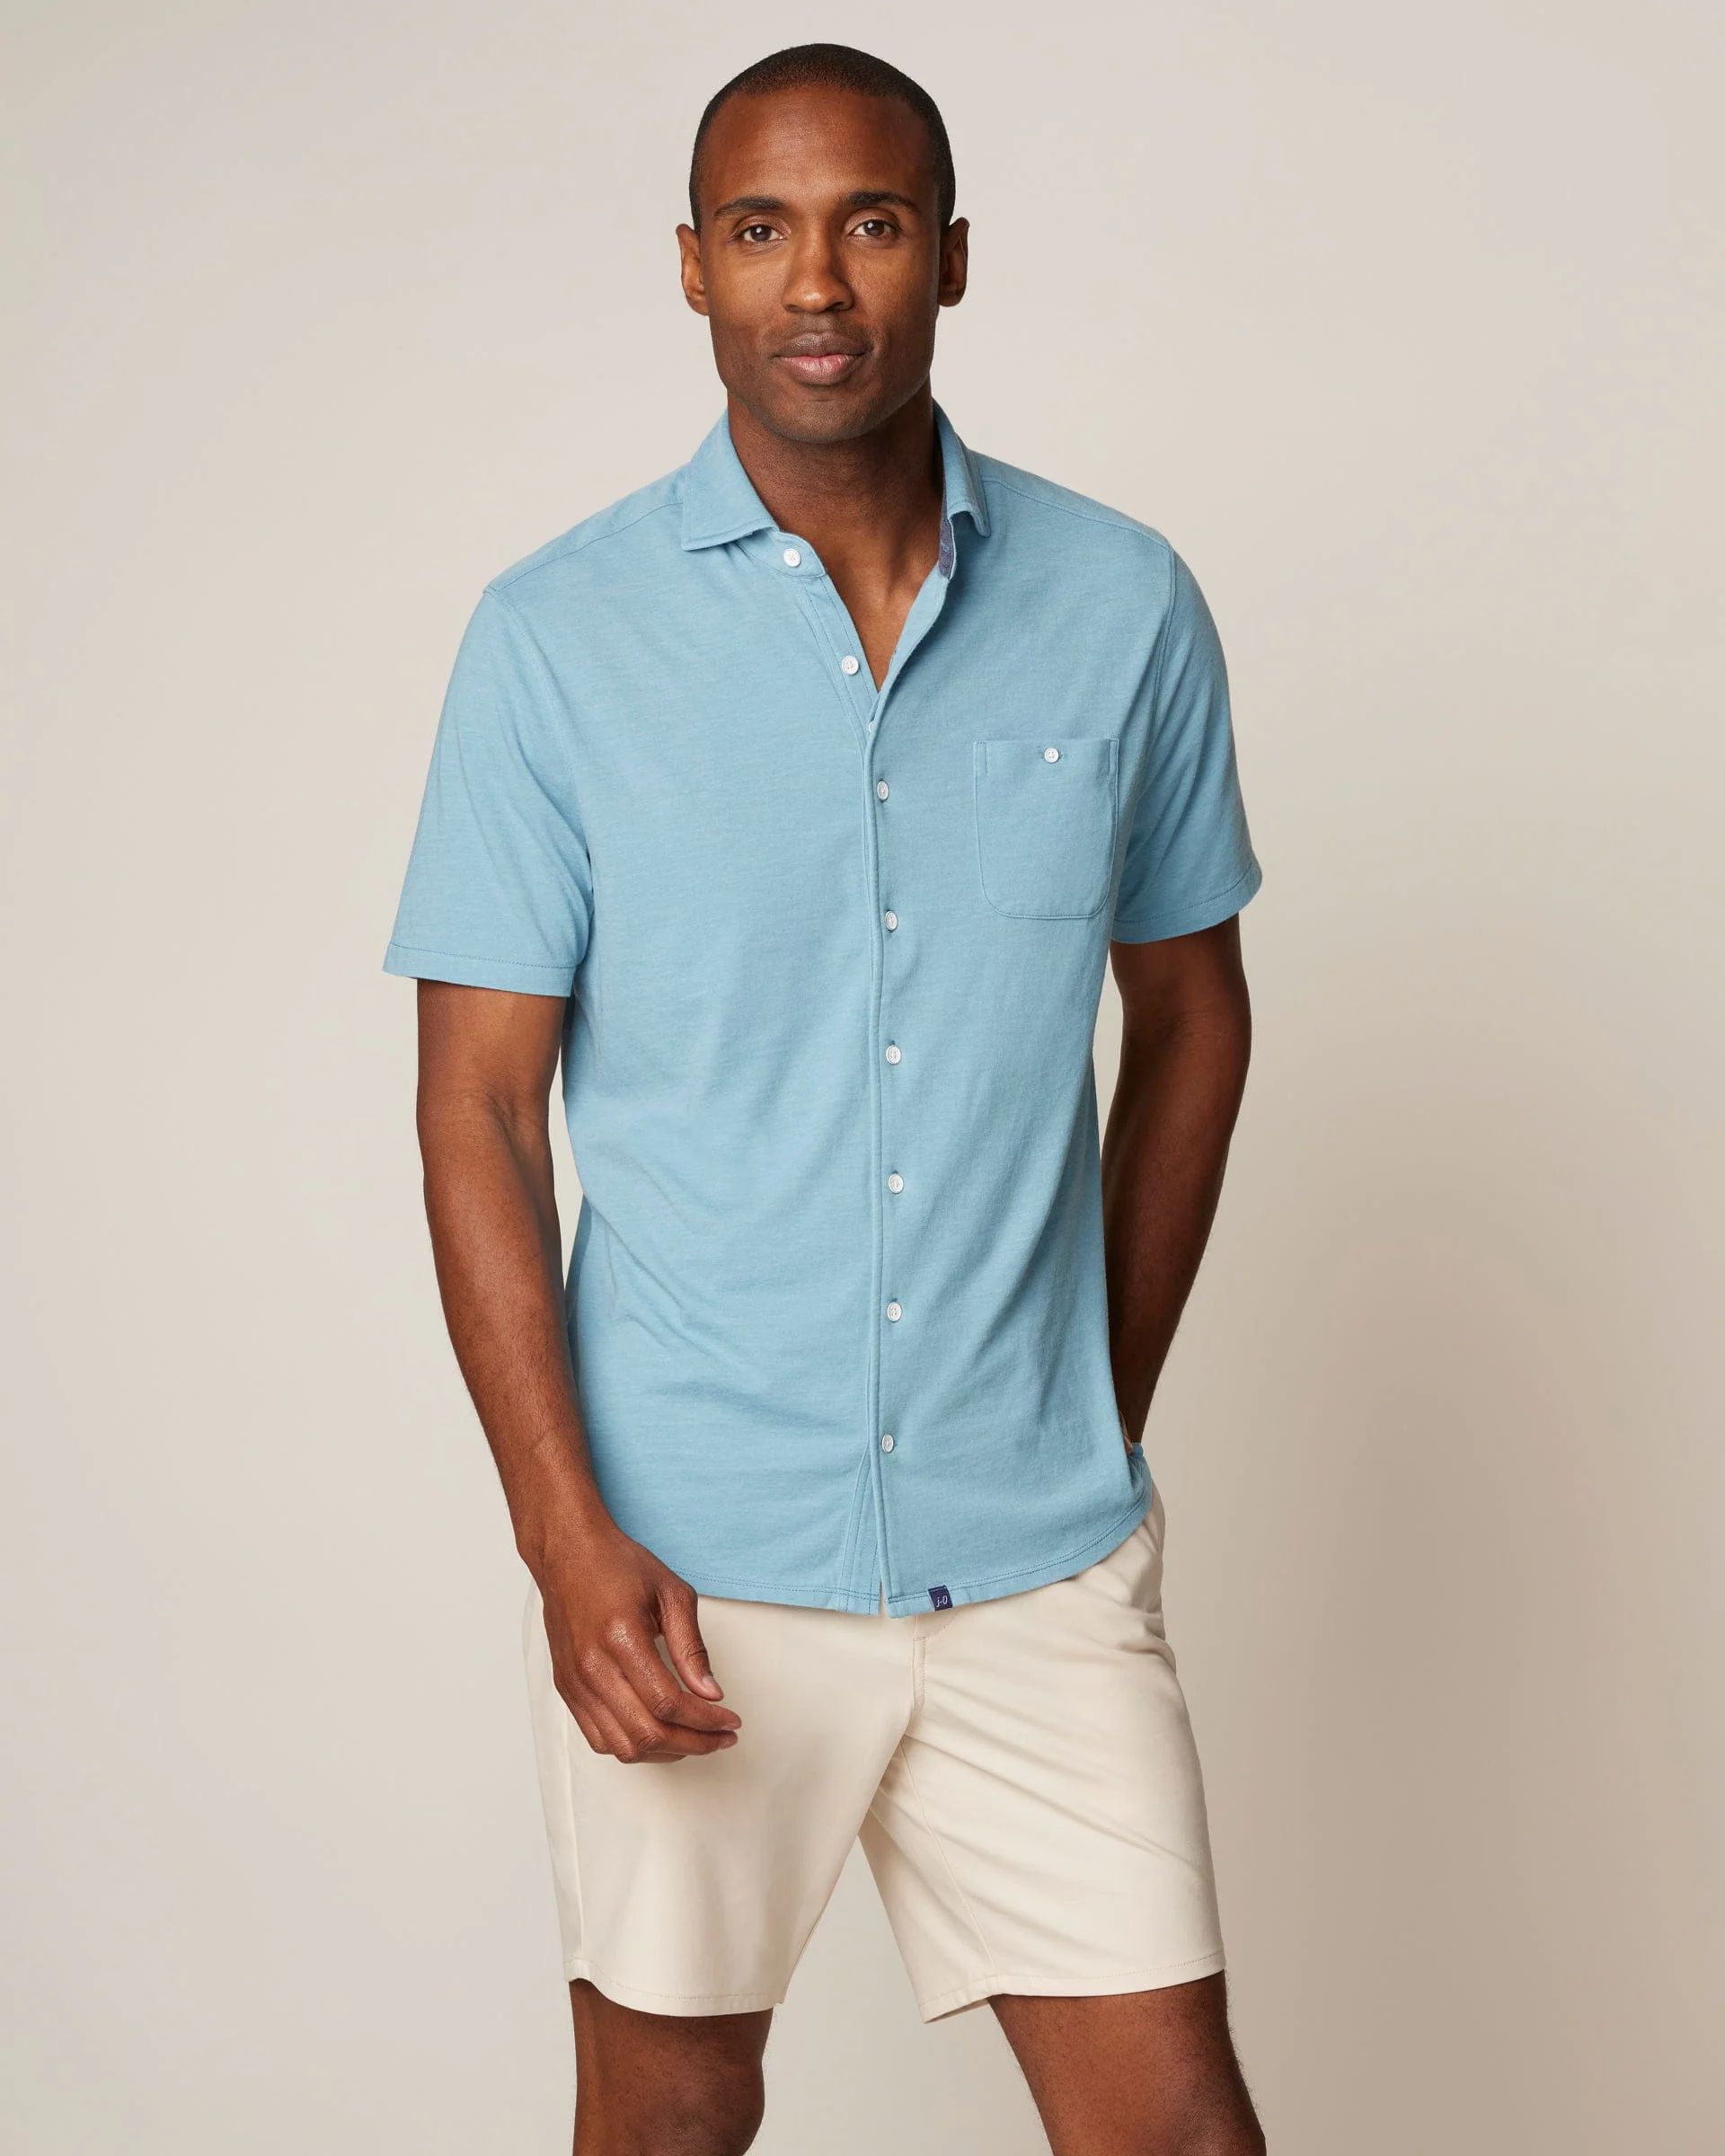 Crouch Hangin' Out Button Up Shirt | johnnie O